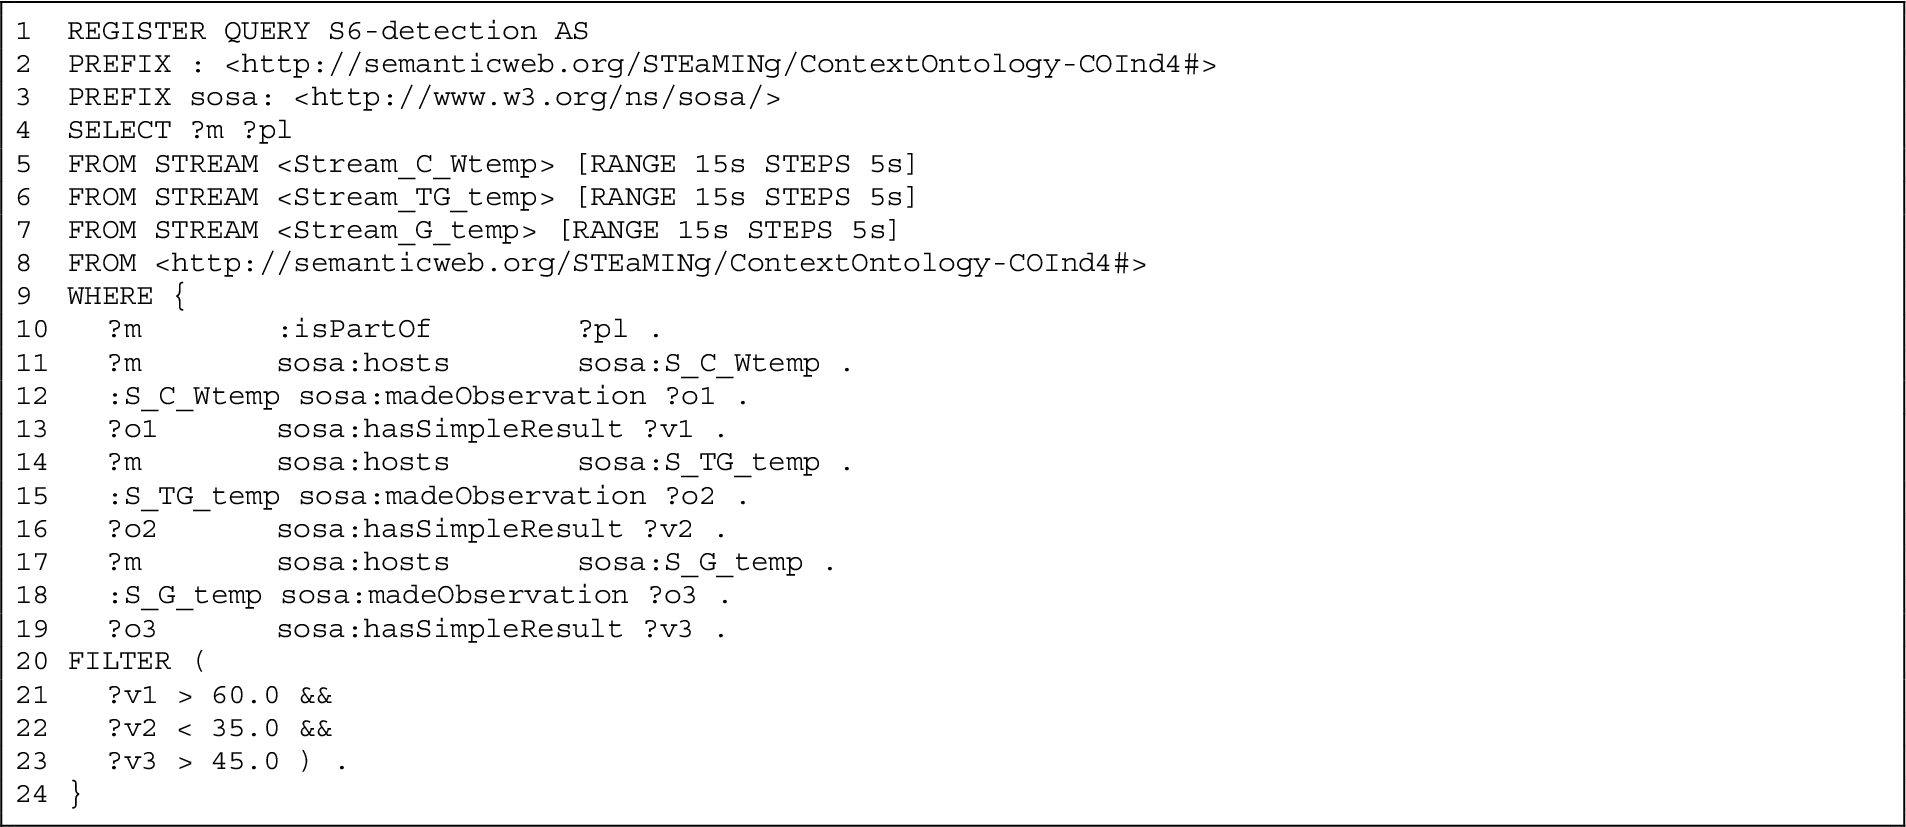 C-SPARQL query to detect the S6 situation